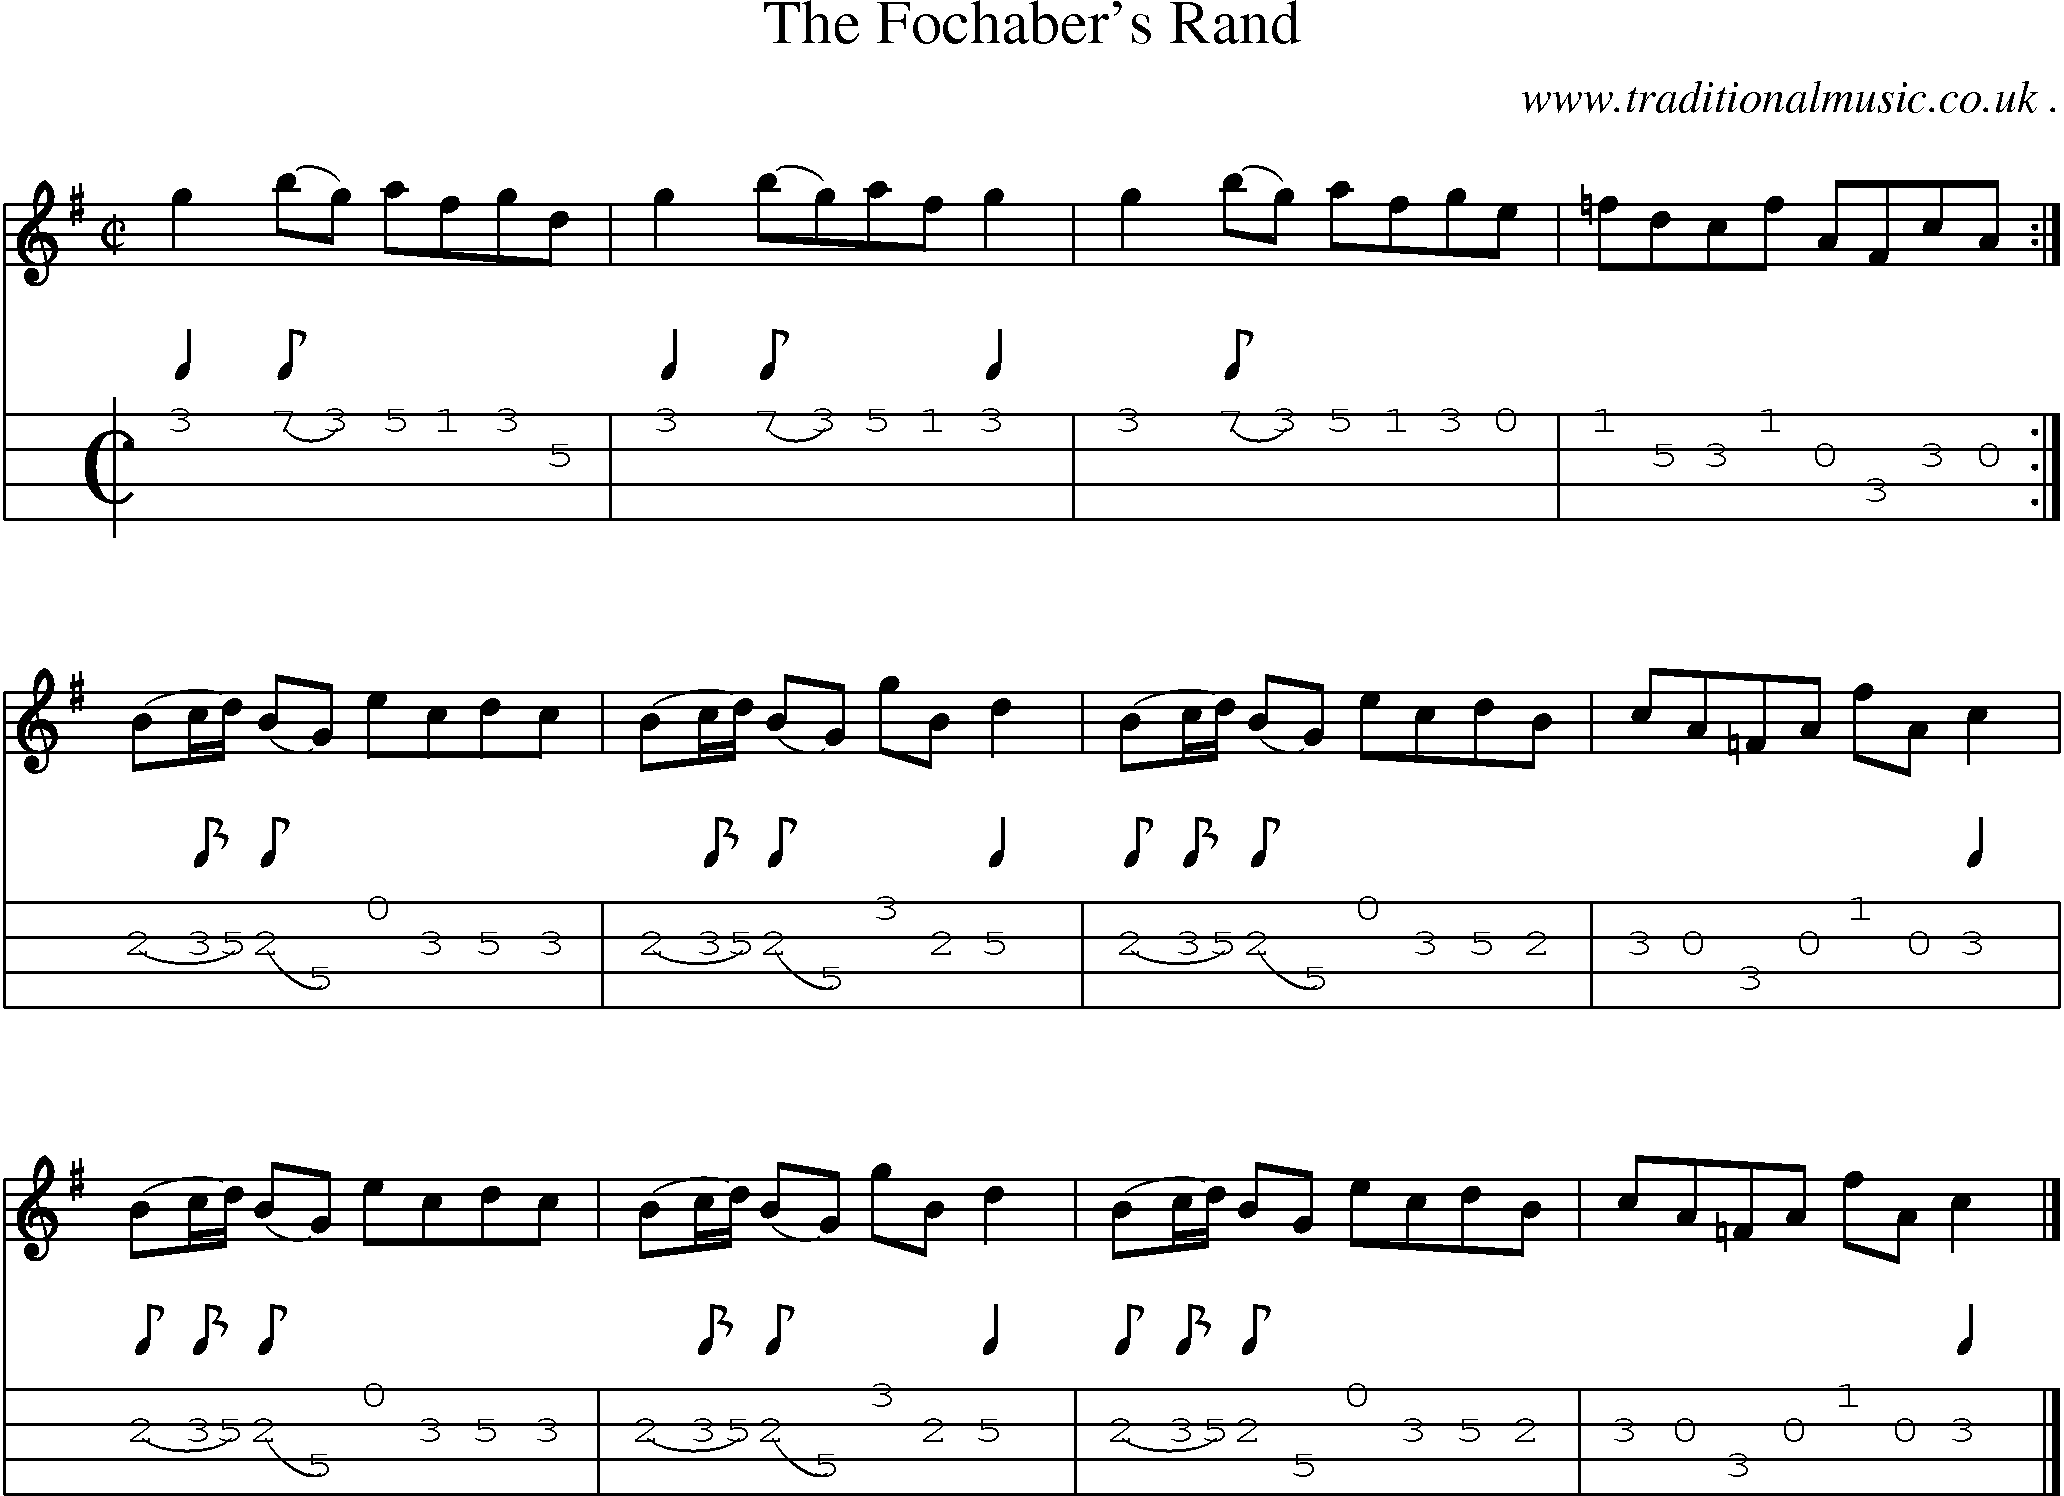 Sheet-music  score, Chords and Mandolin Tabs for The Fochabers Rand